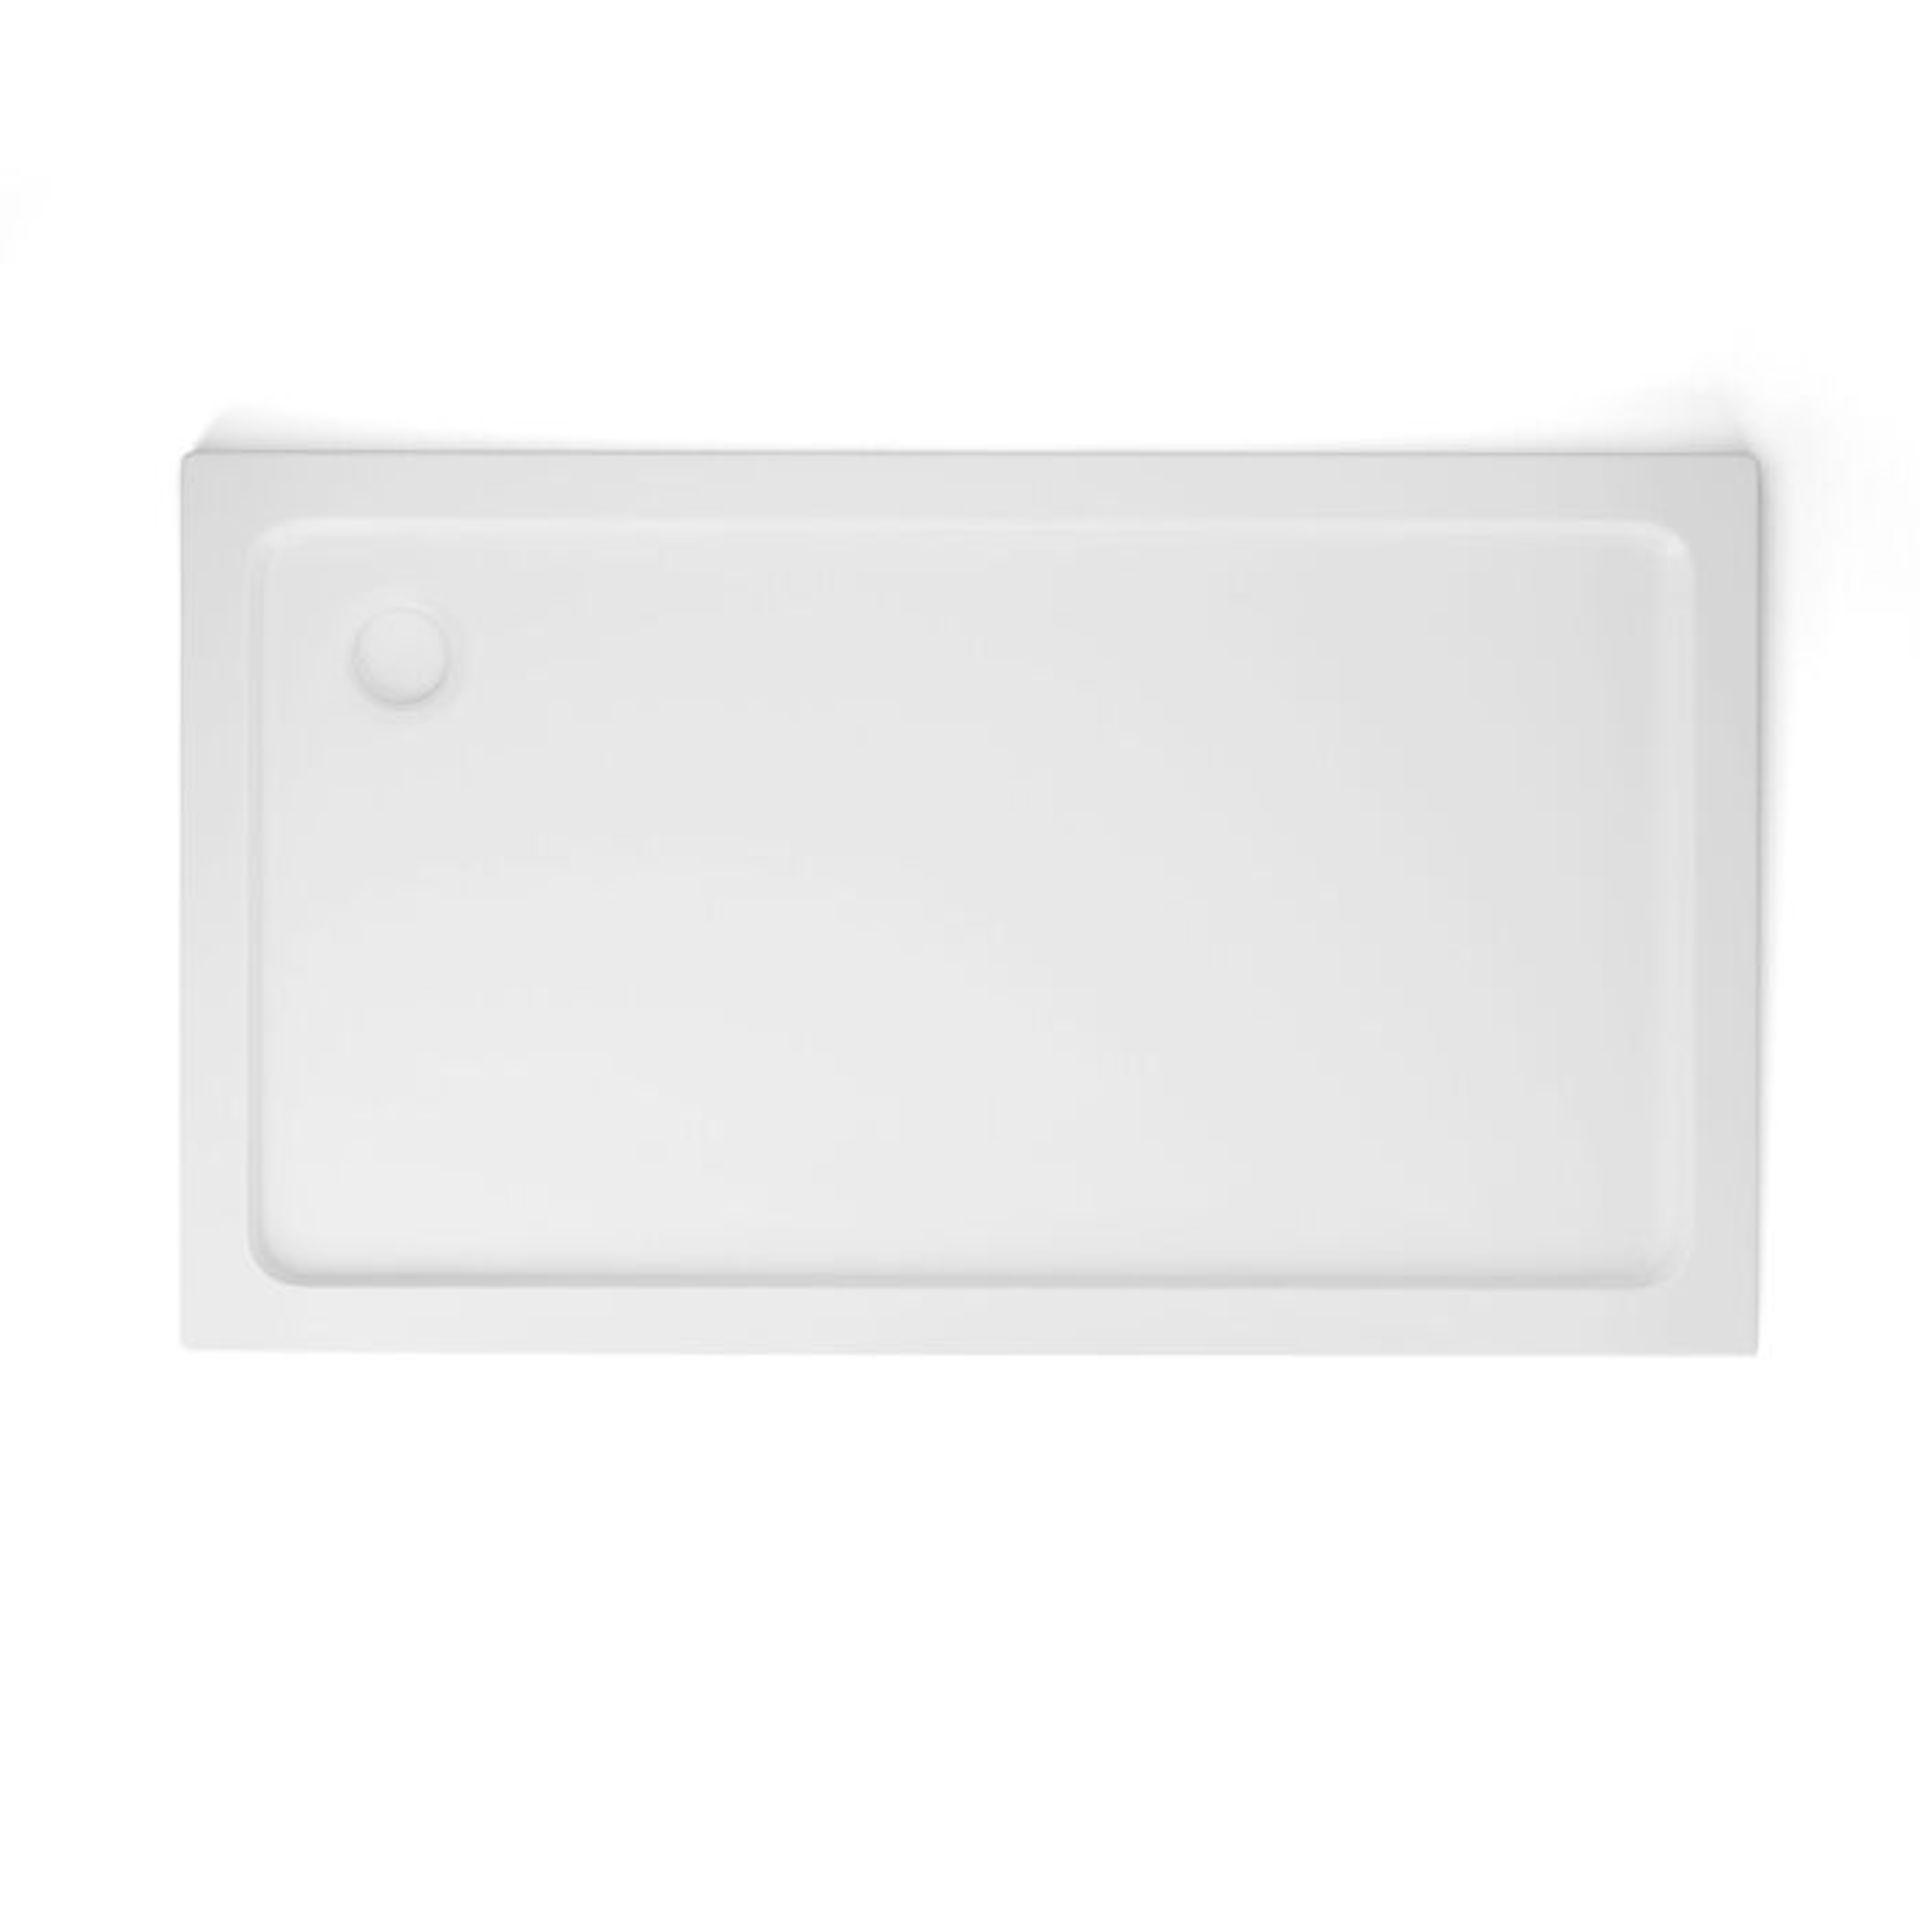 (DD154) 1400x800mm Rectangular Ultra Slim Stone Shower Tray. RRP £349.99. Constructed from acr...